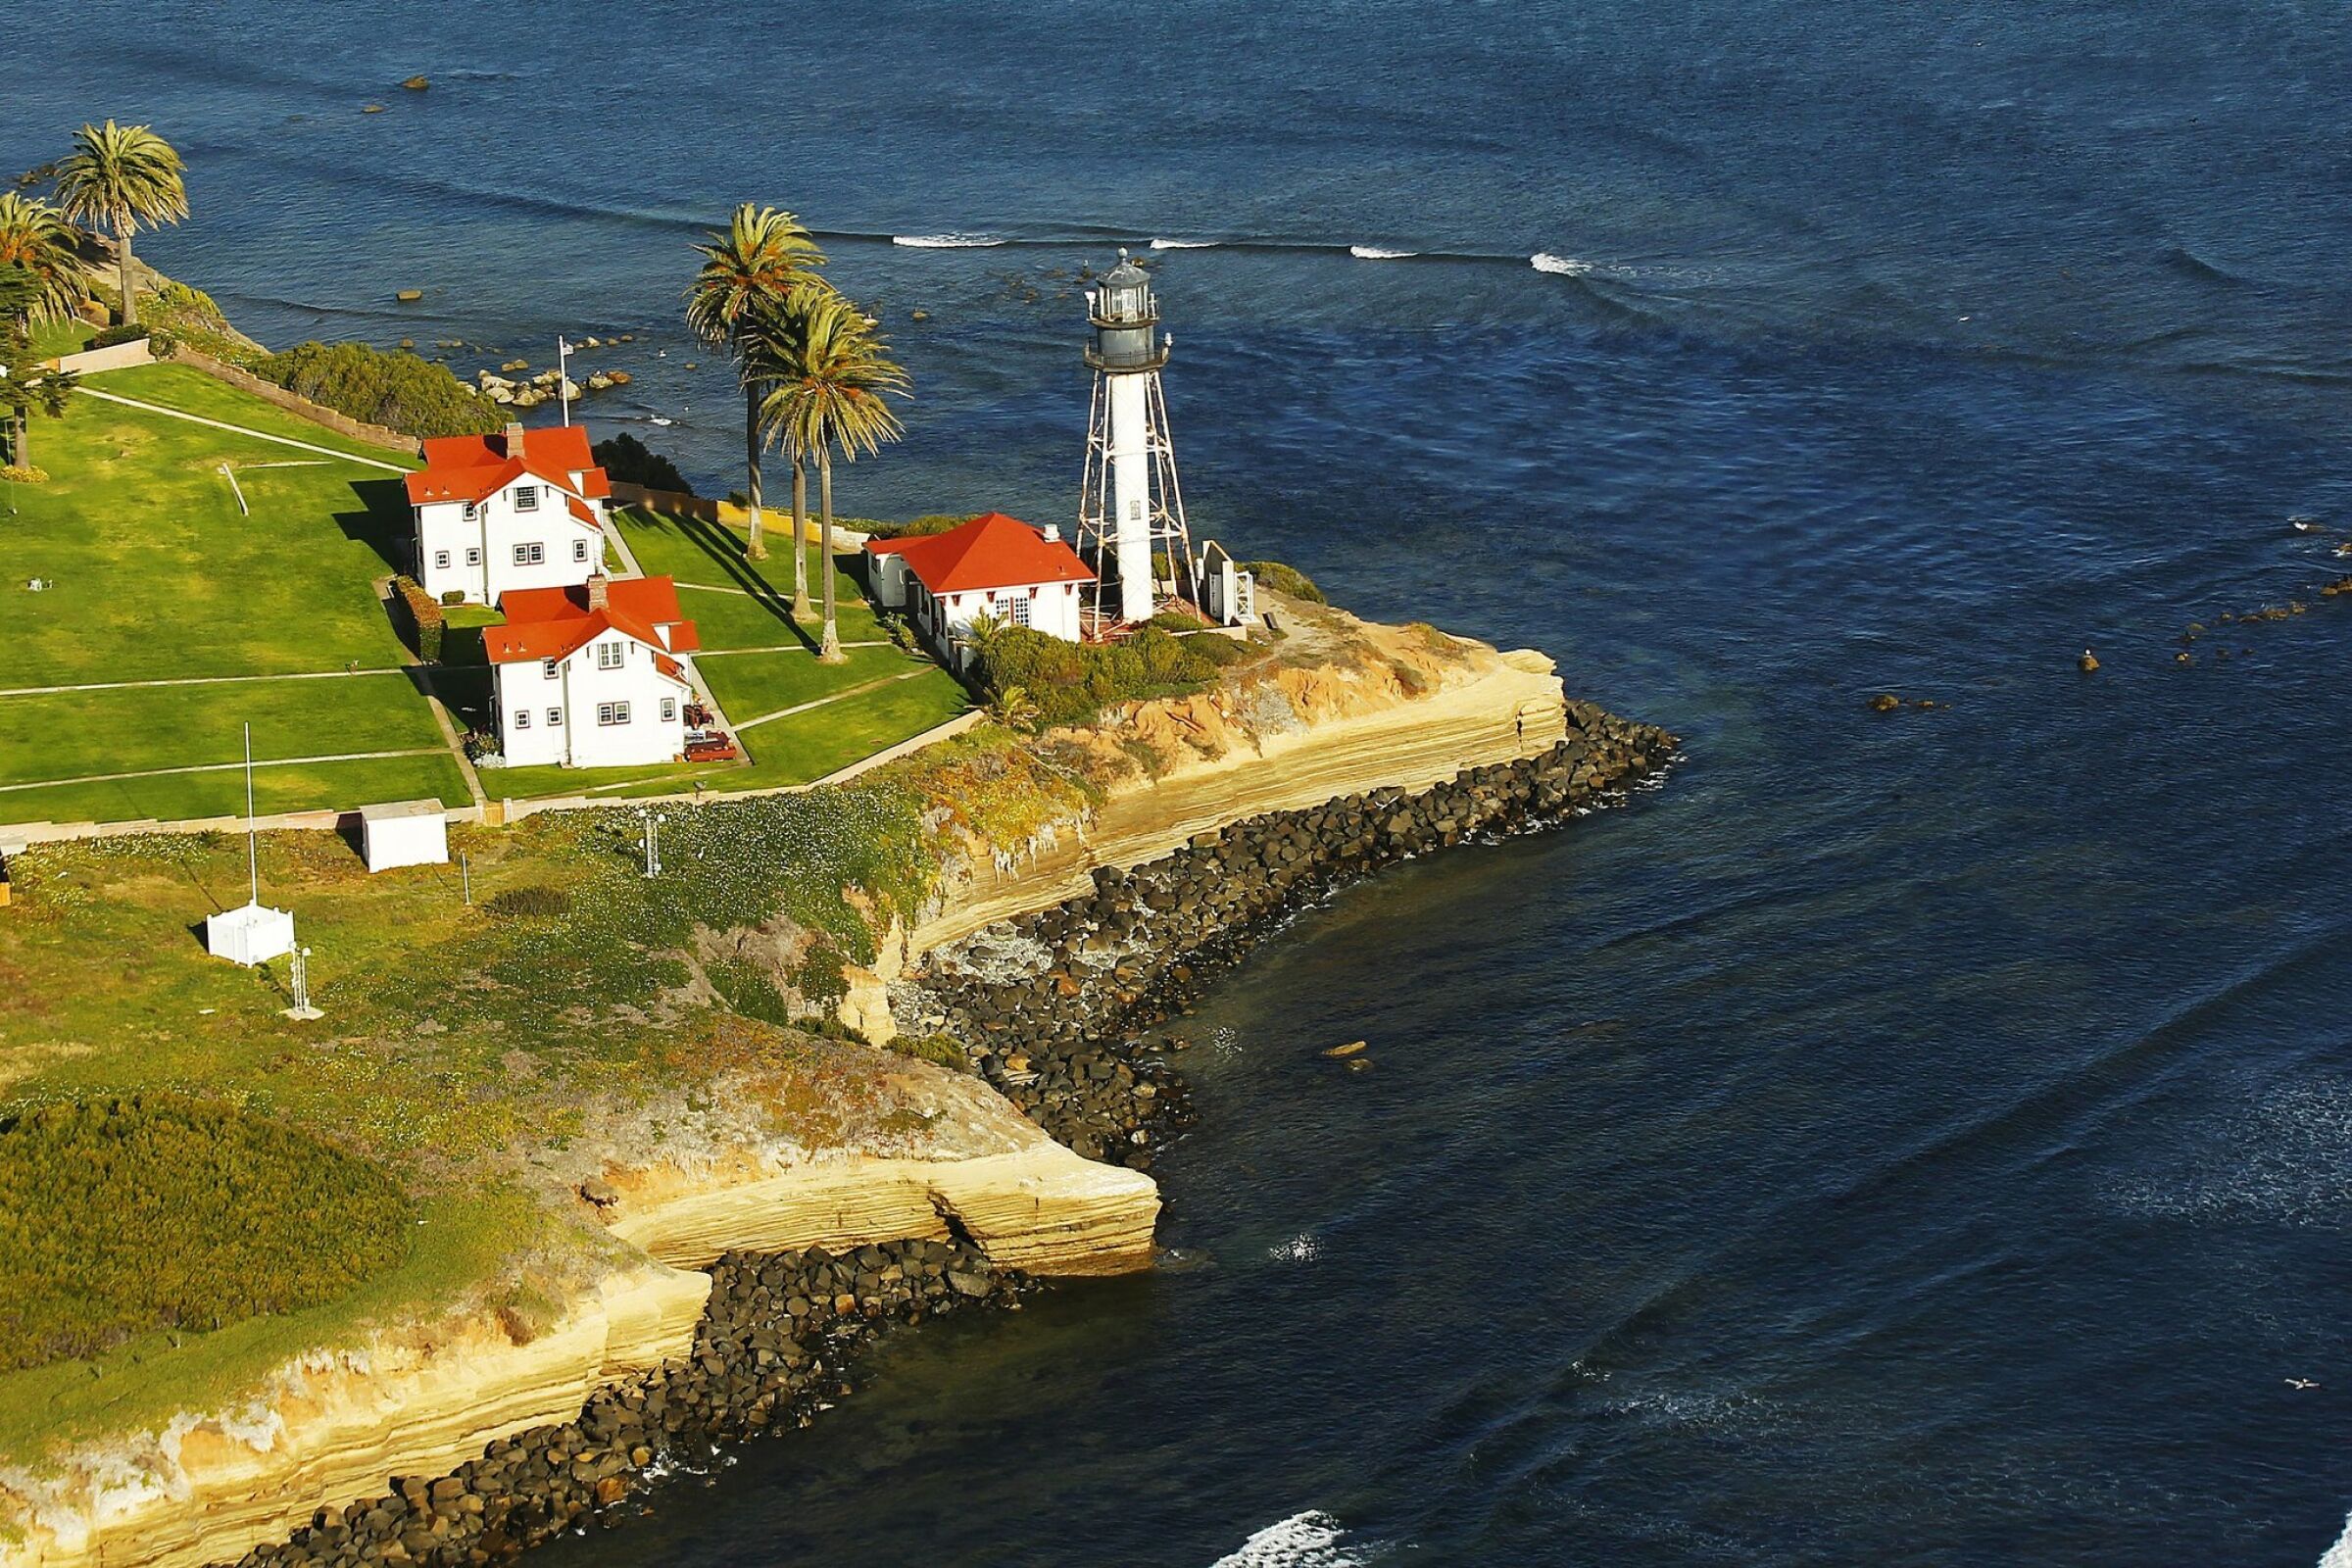 The New Point Loma Lighthouse (officially Point Loma Light) sits at the southern tip of the Point Loma peninsula.